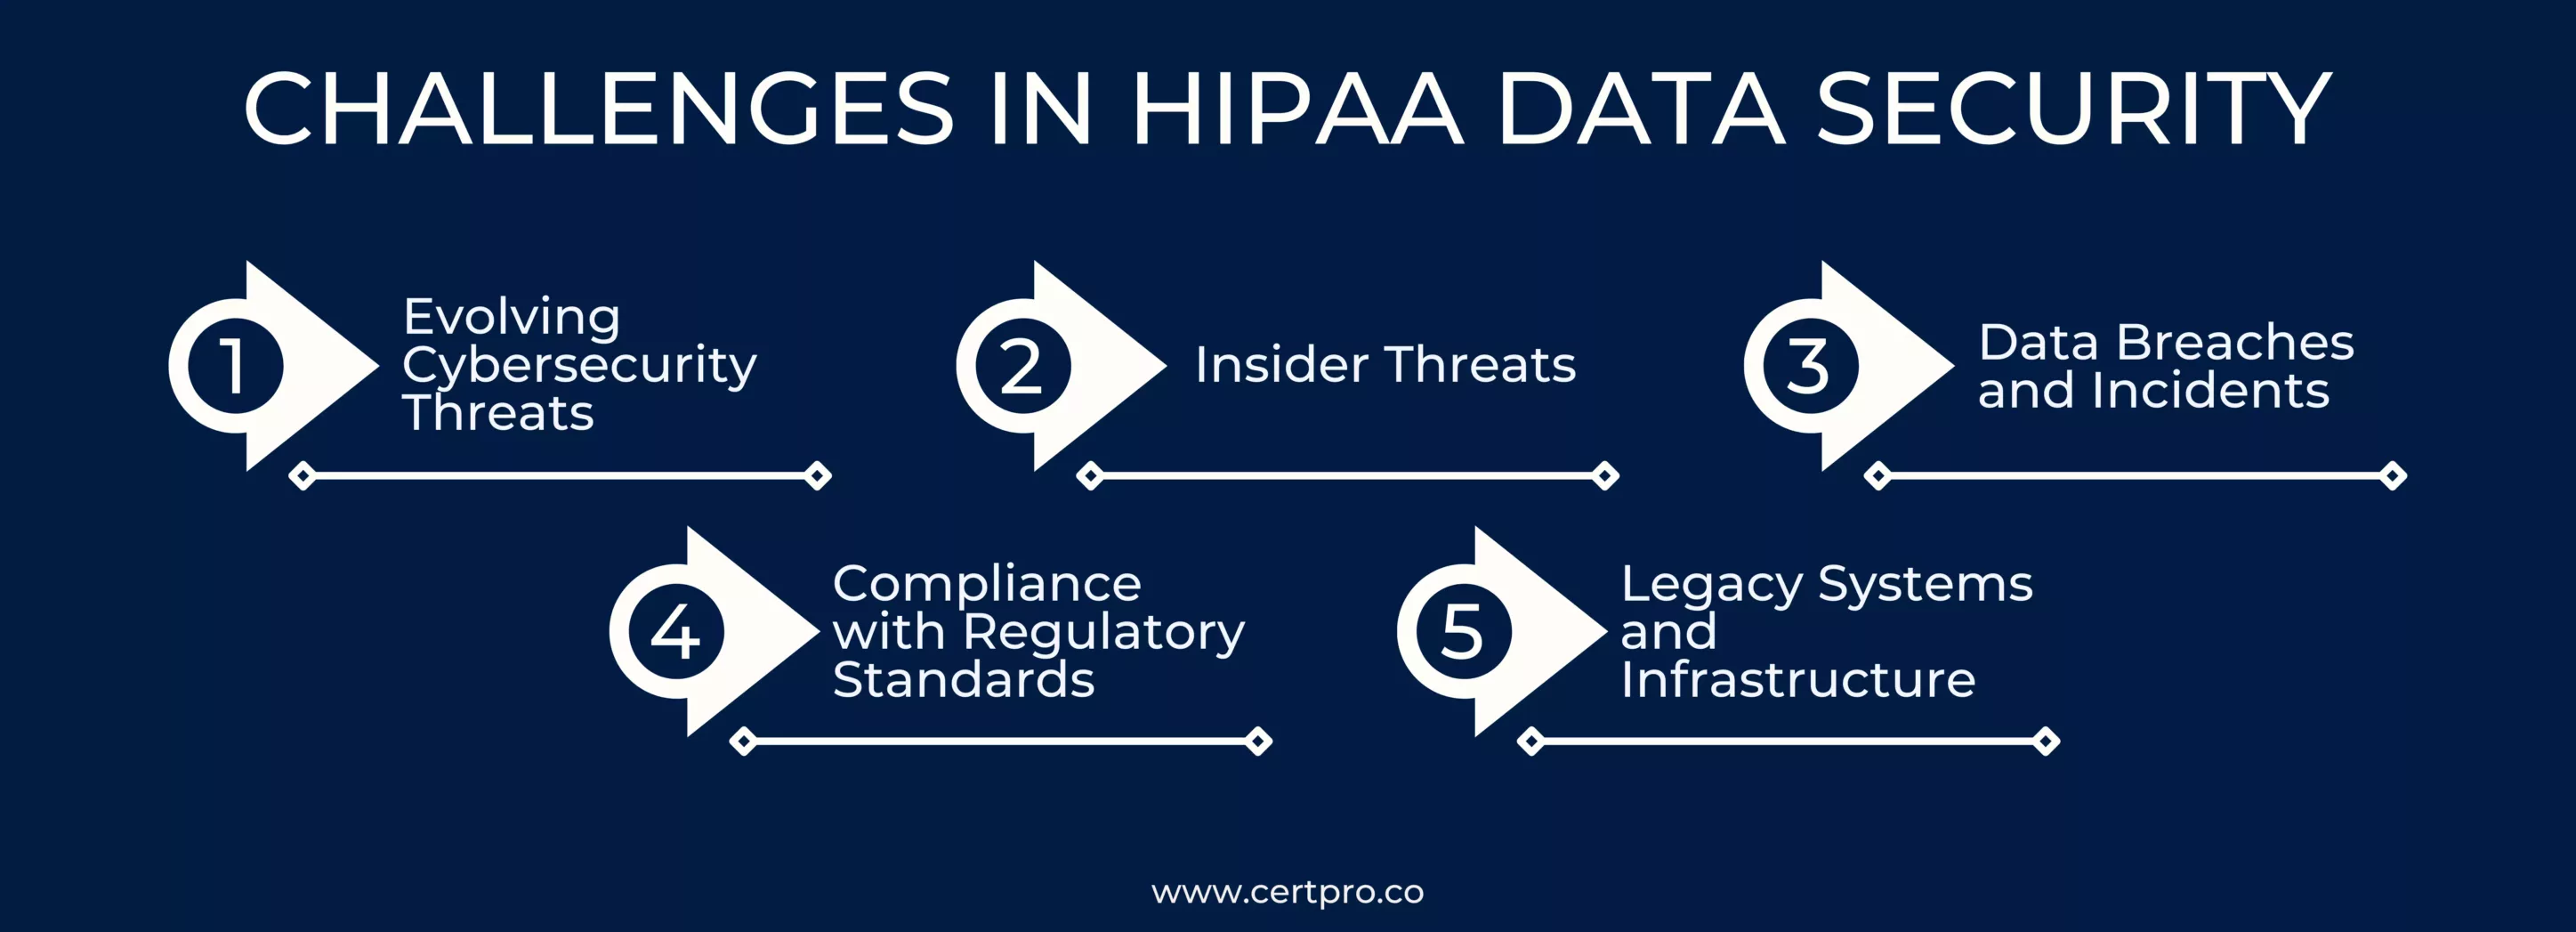 CHALLENGES IN HIPAA DATA SECURITY